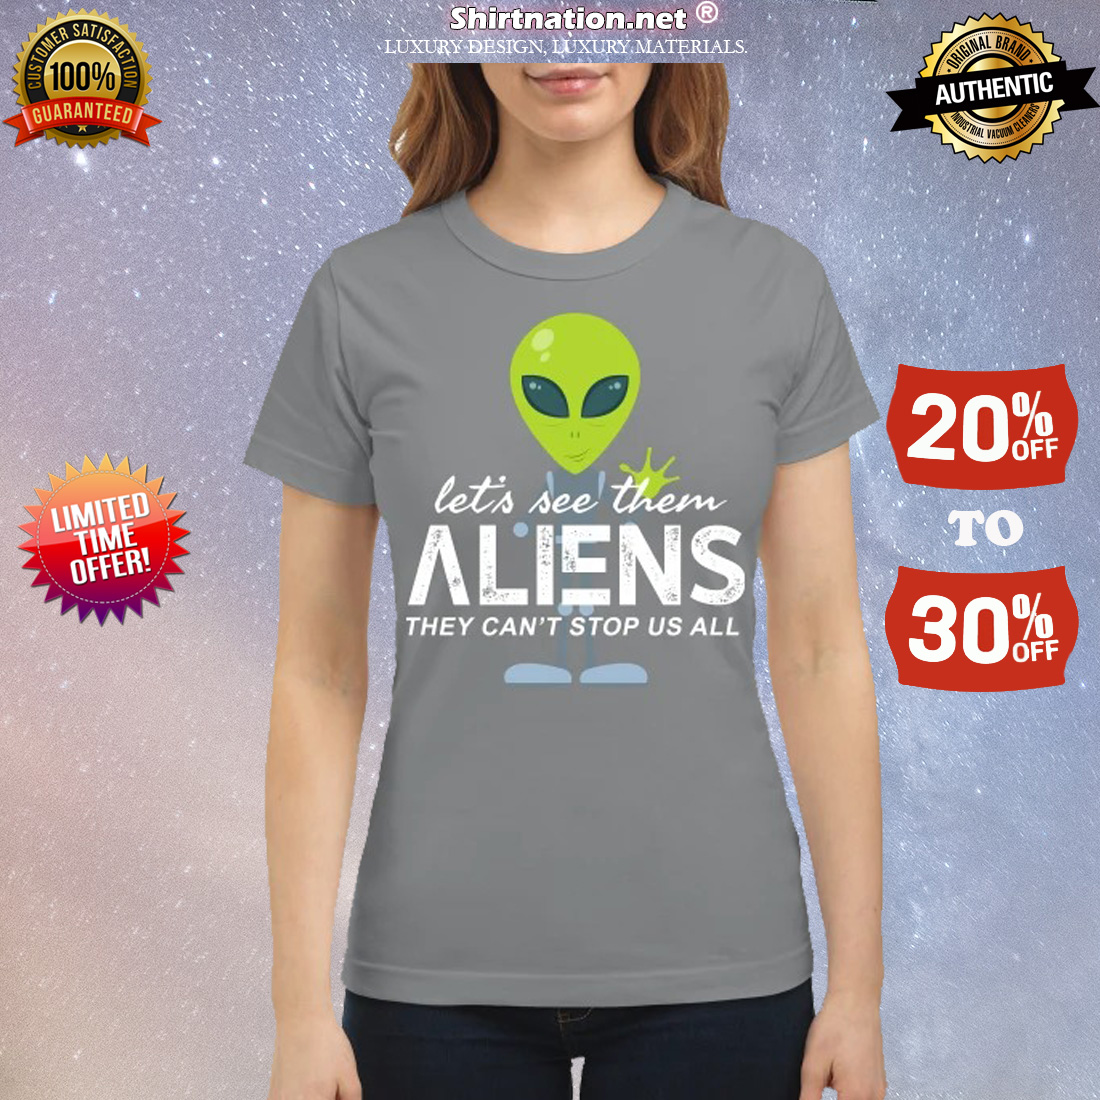 Let's see them aliens they can't stop us all classic shirt